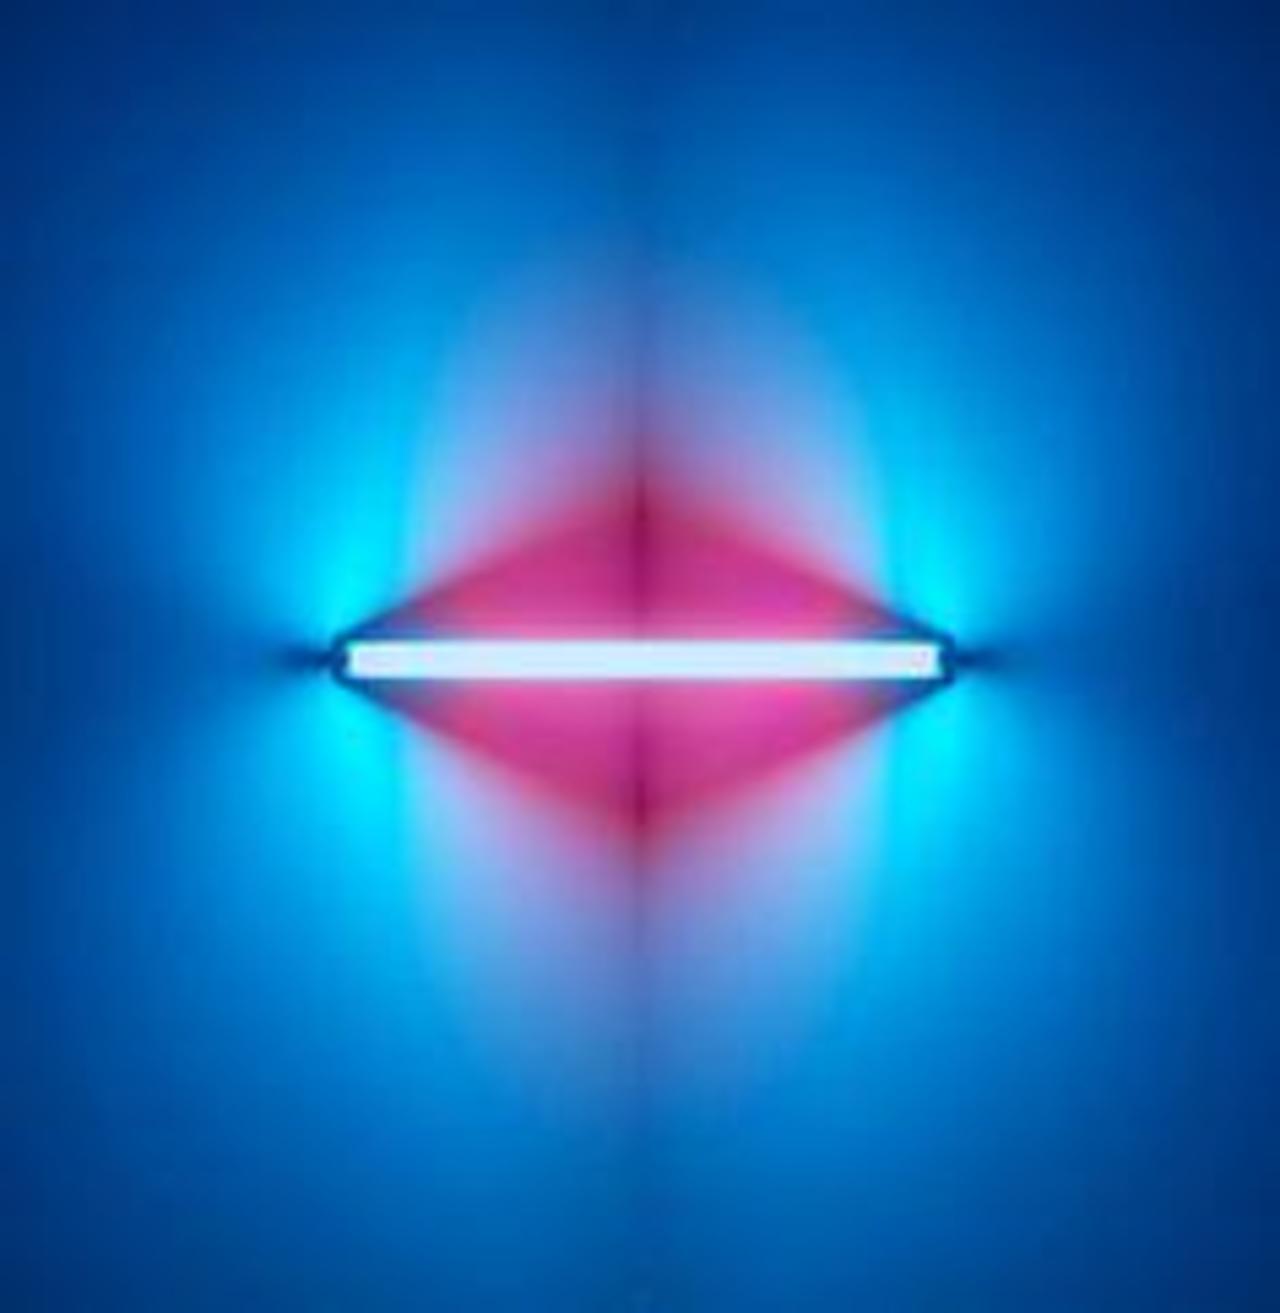 More #flavin #obsessed #lightart #coollights #inspiration http://t.co/1zCGkxqnxm